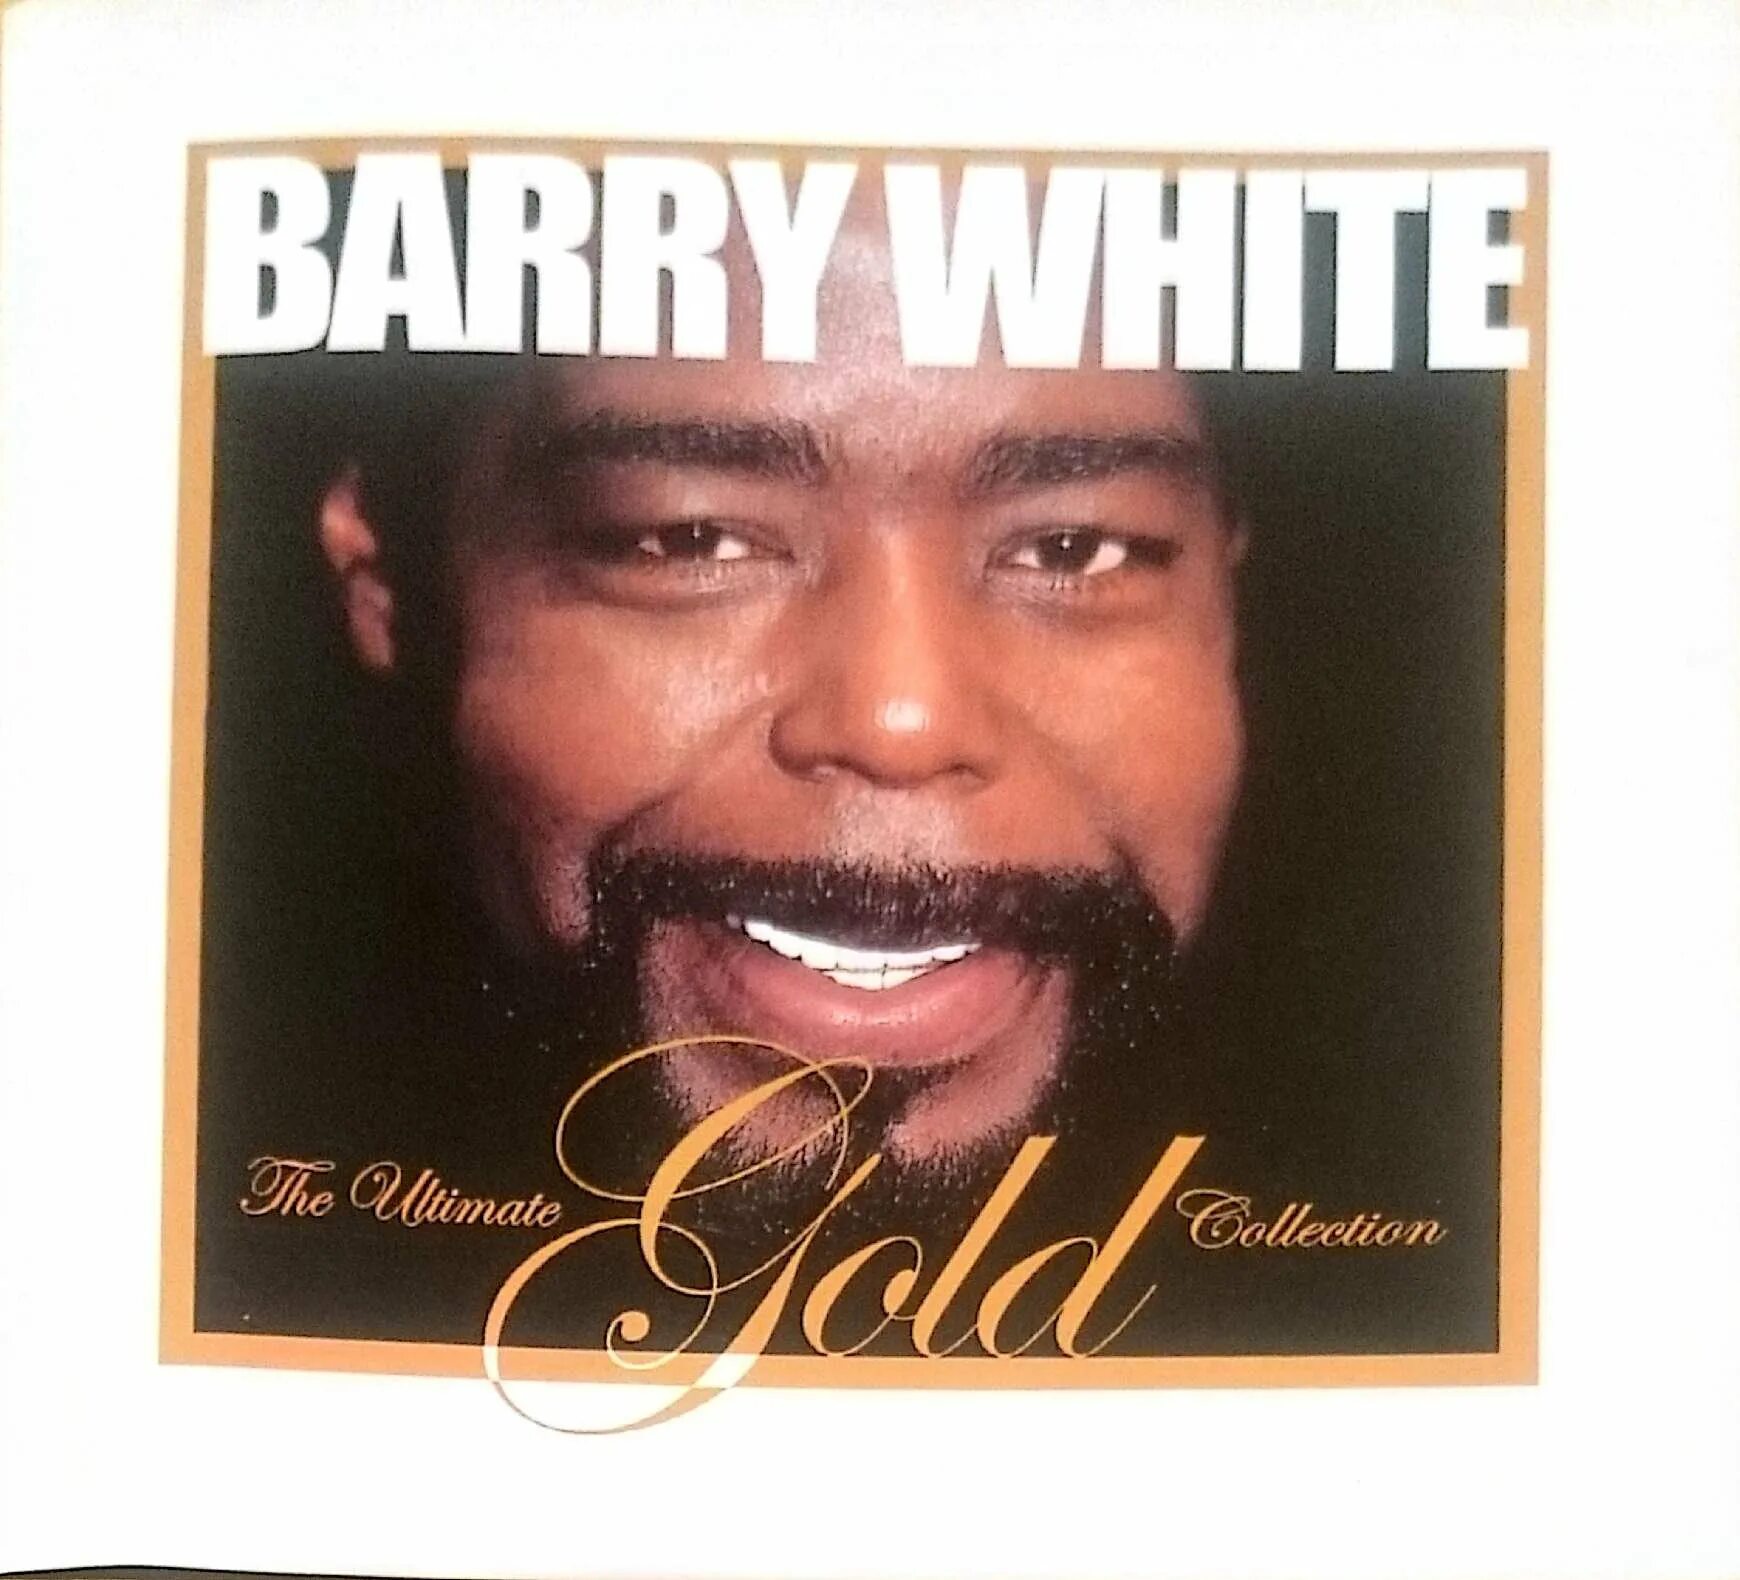 The Ultimate collection Барри Уайт. Barry White альбомы. Лучшие обложки альбомов Barry White. Barry White Blu ray.